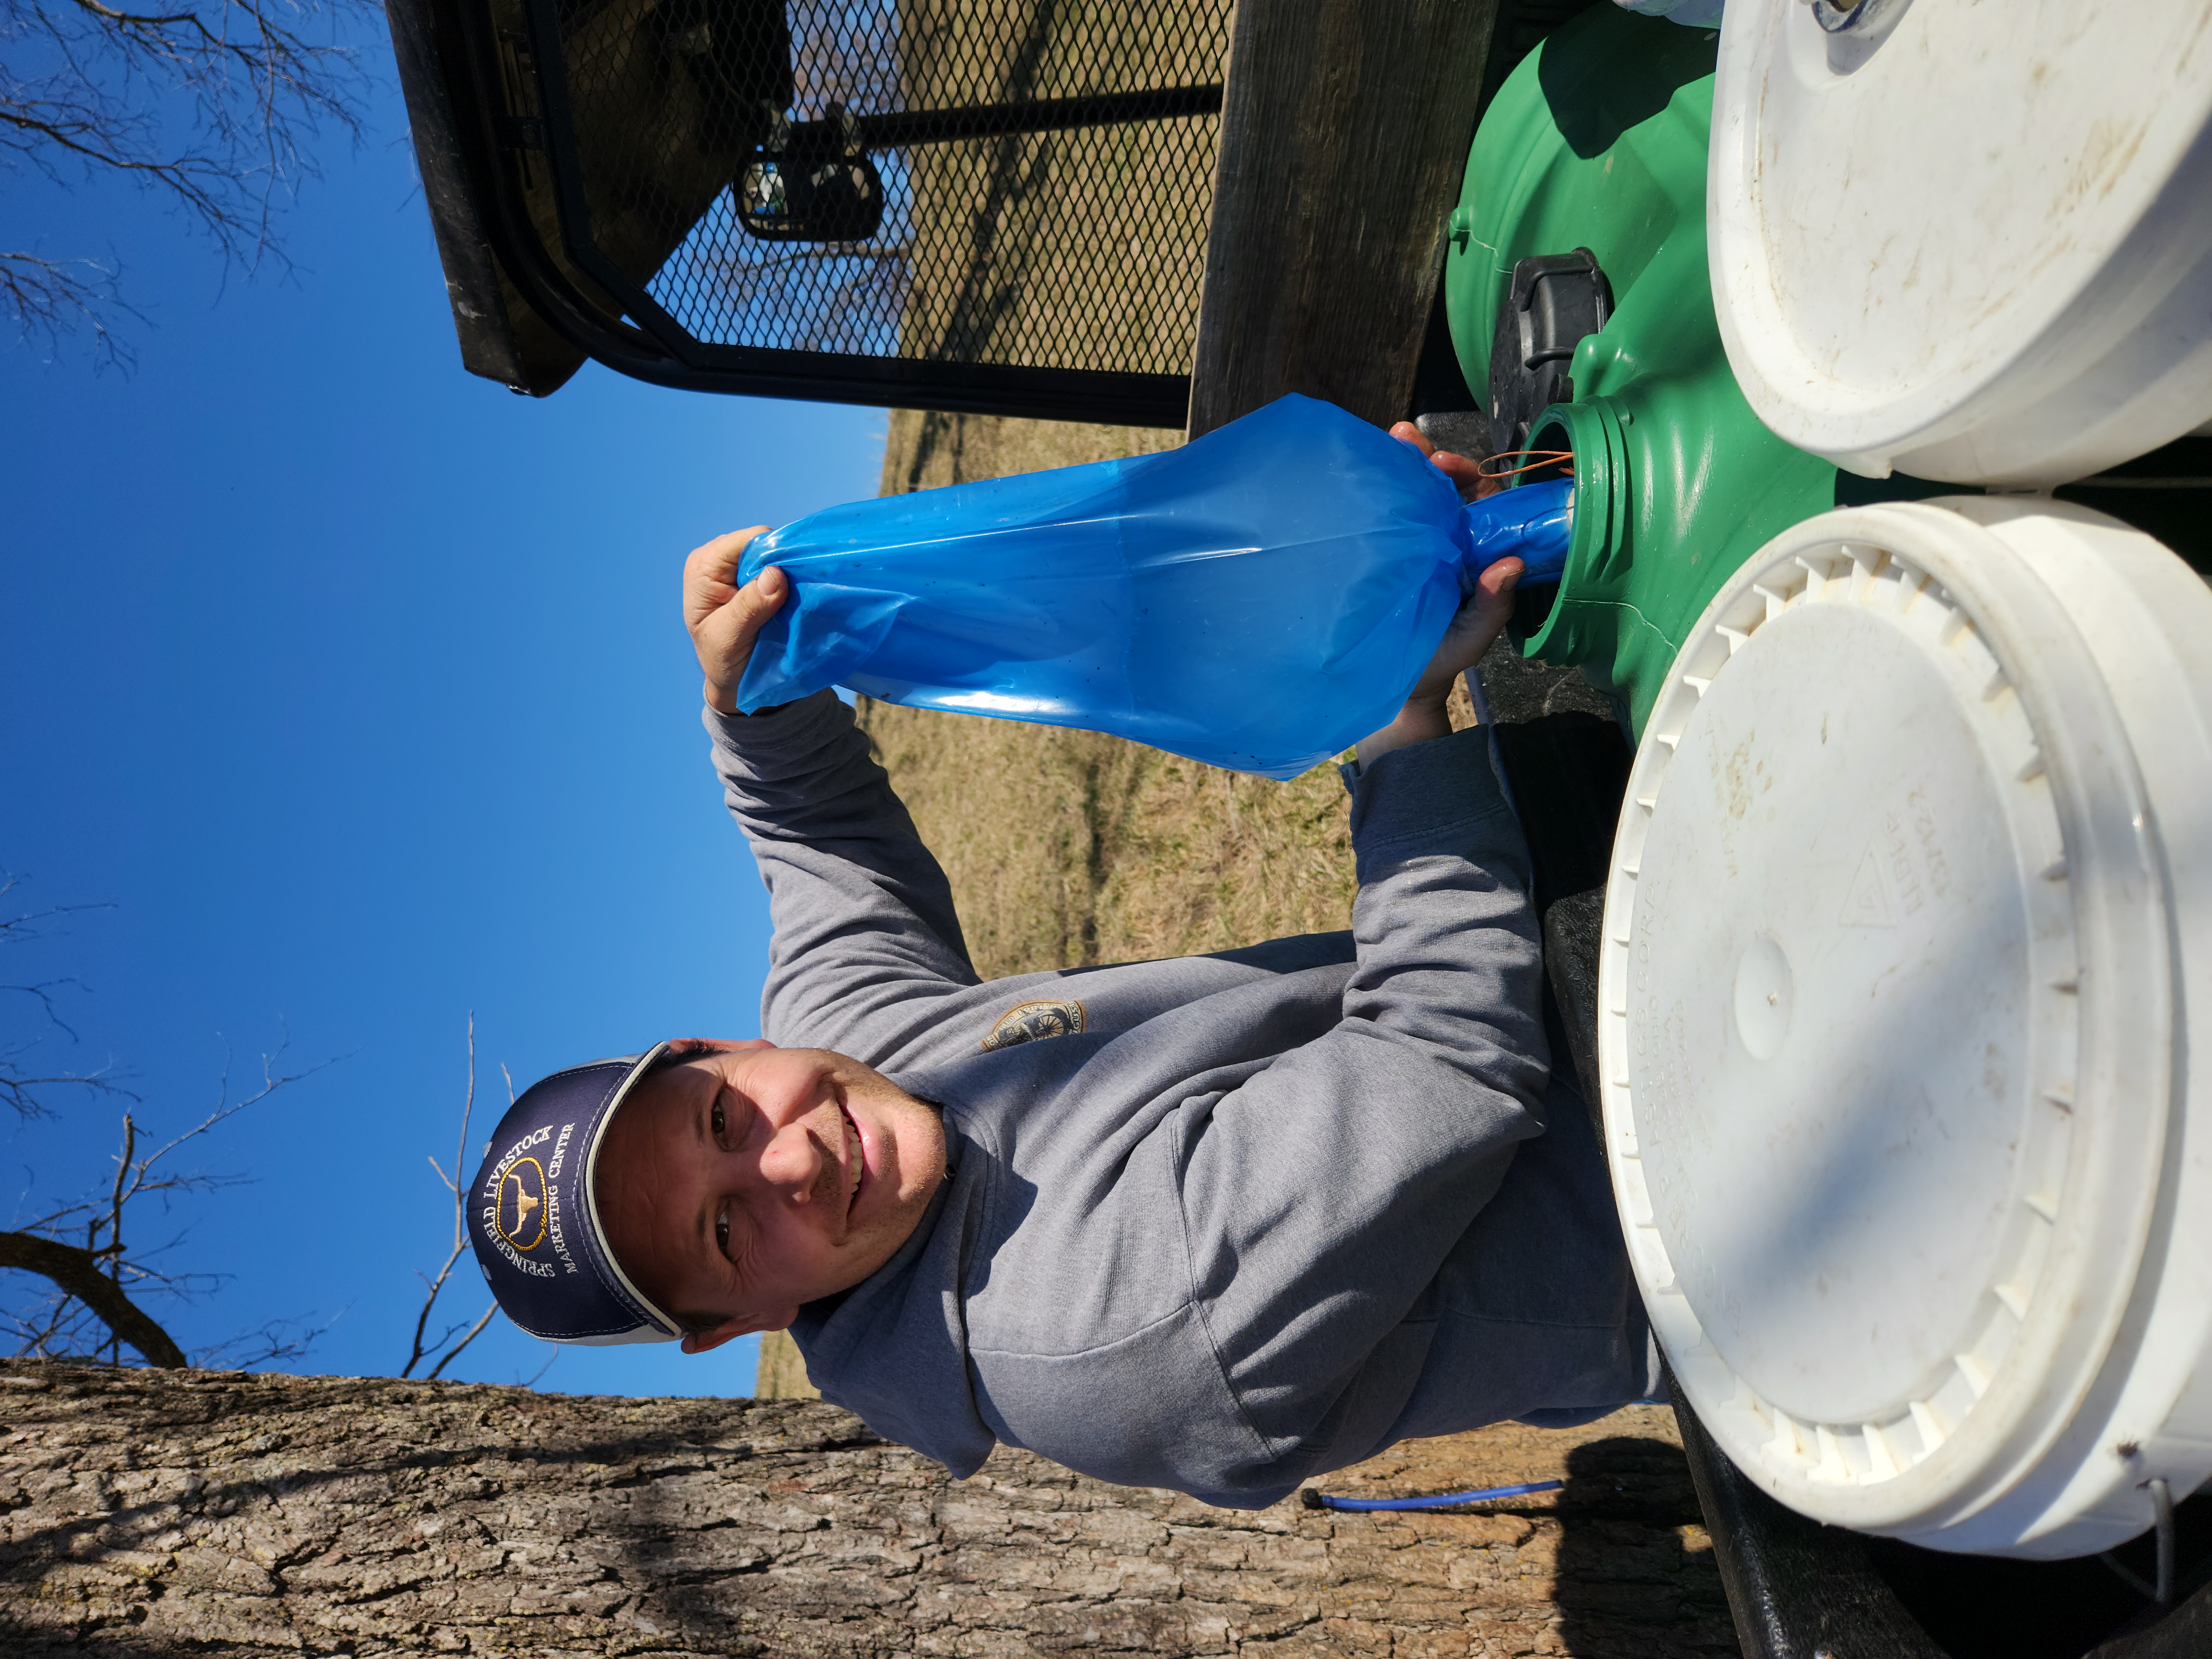 A smiling man pours tree sap from a blue bag into a green plastic container